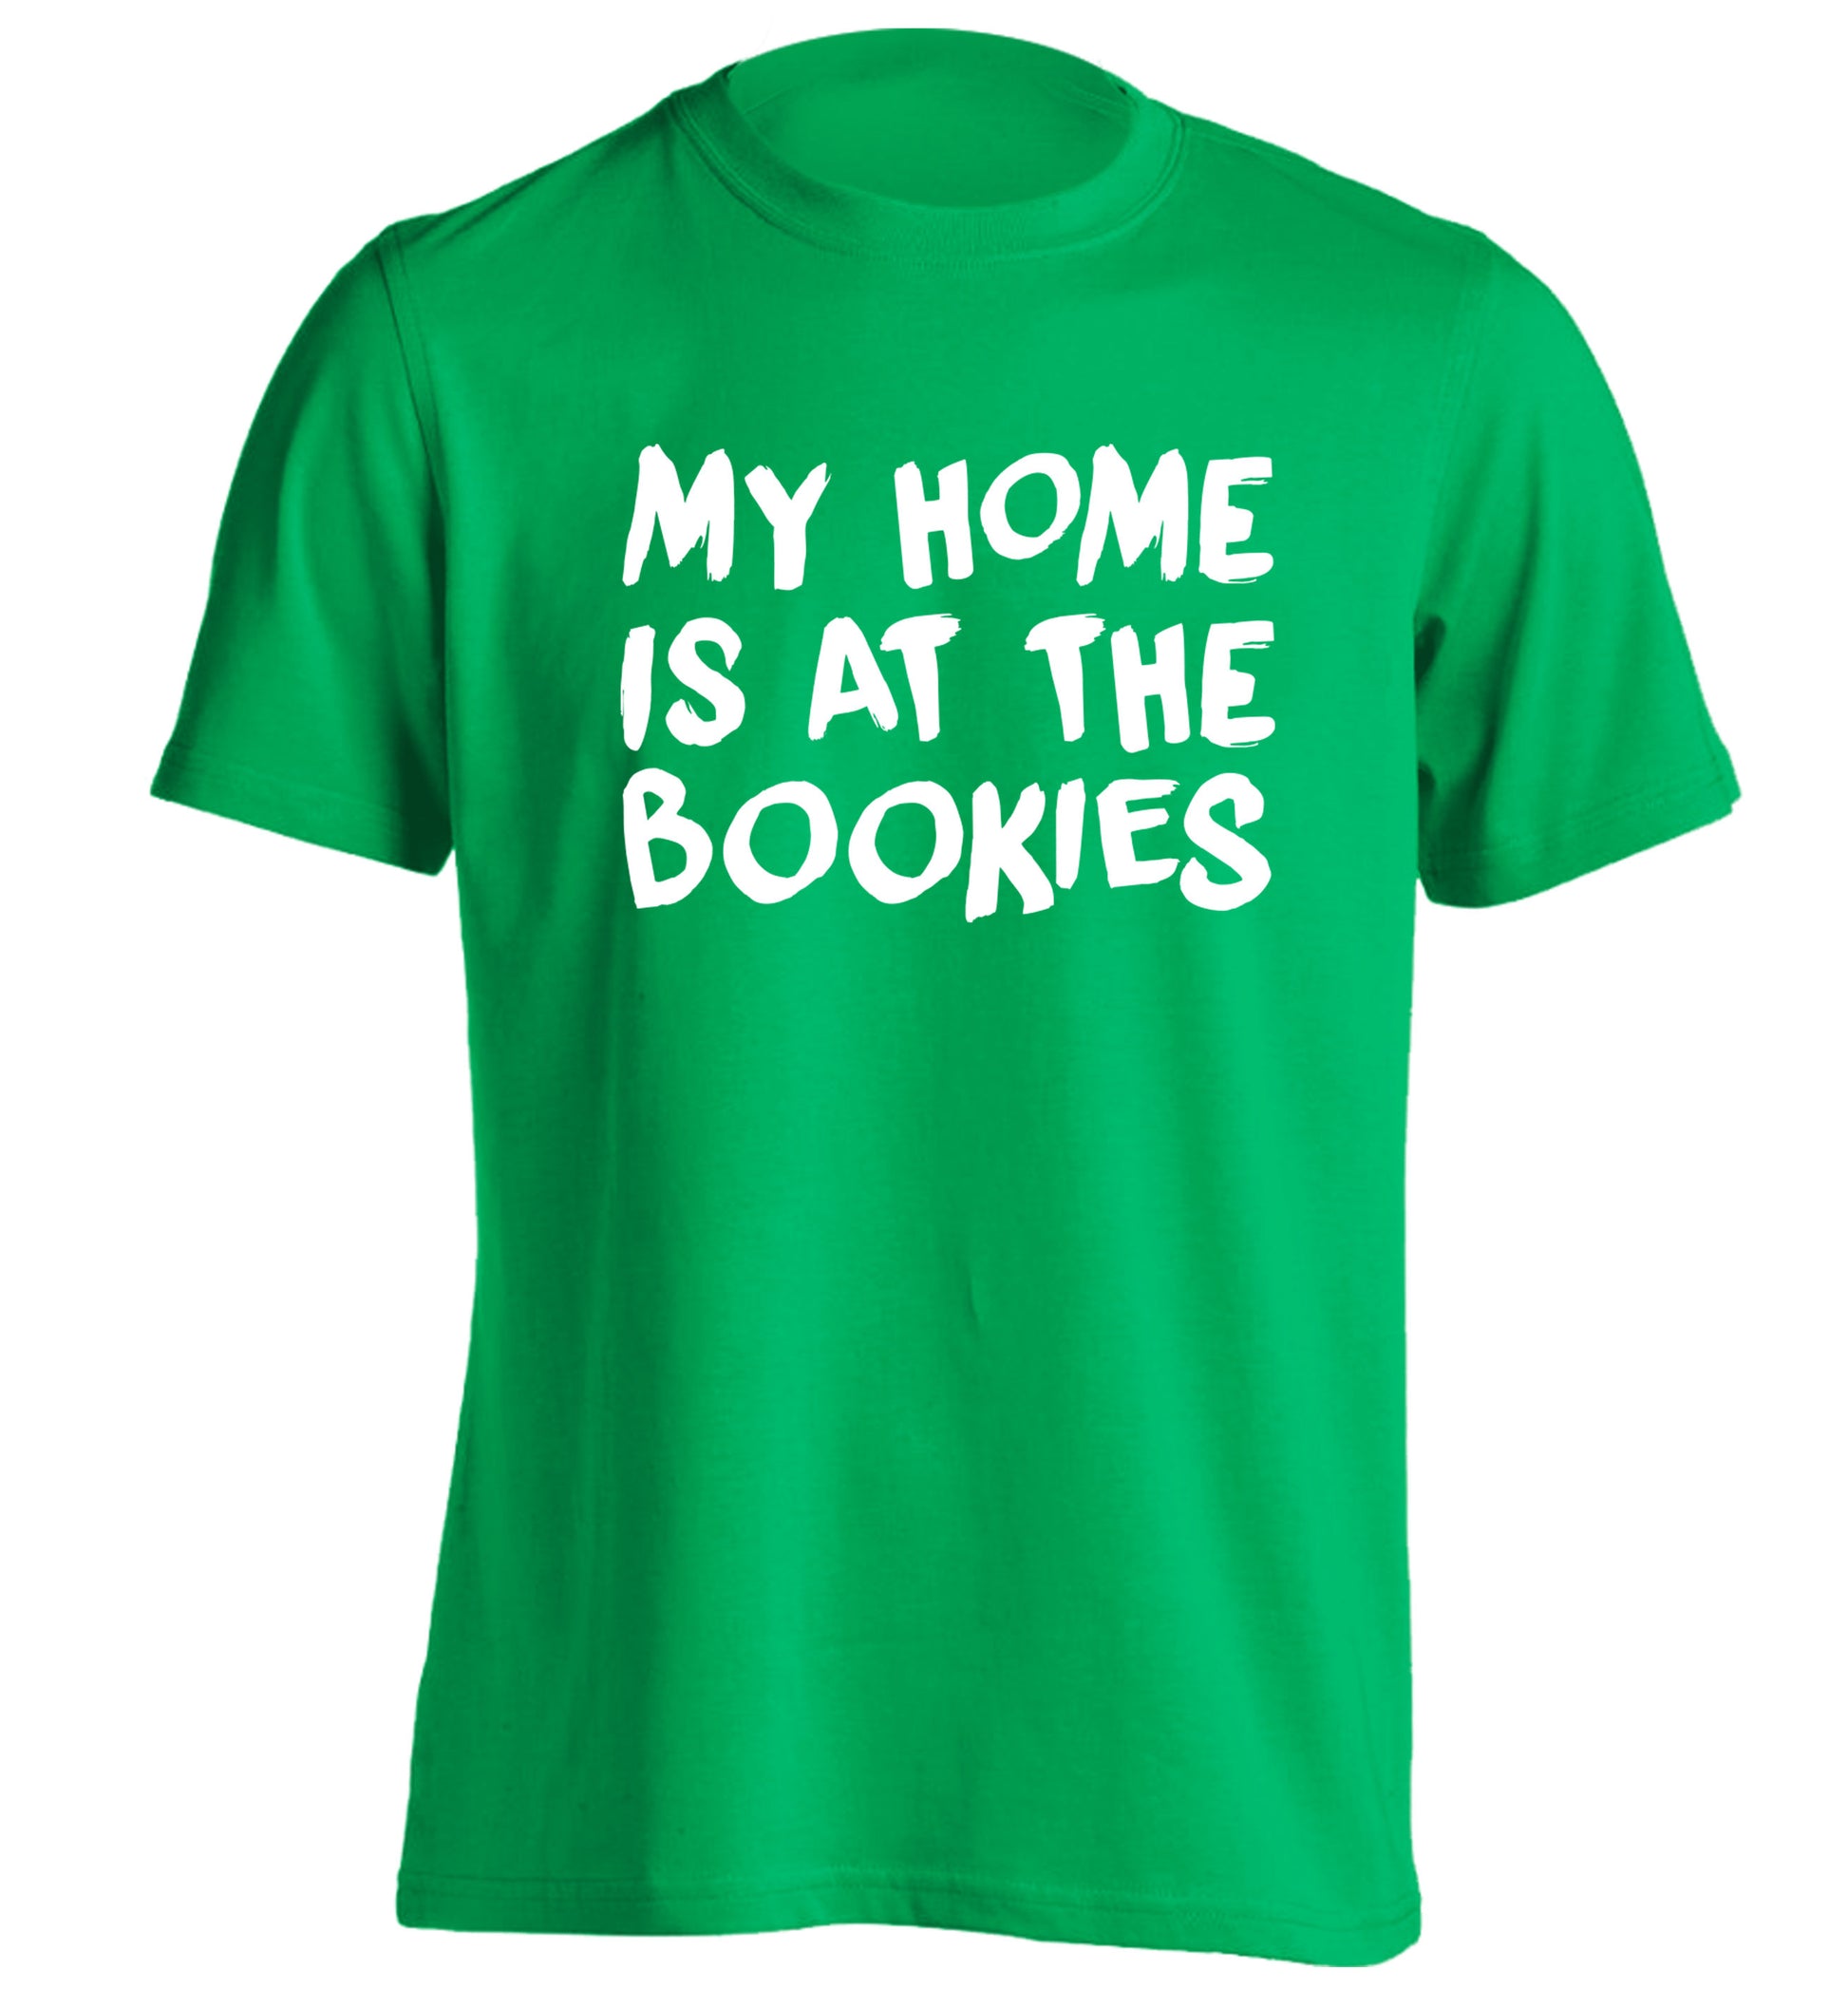 My home is at the bookies adults unisex green Tshirt 2XL